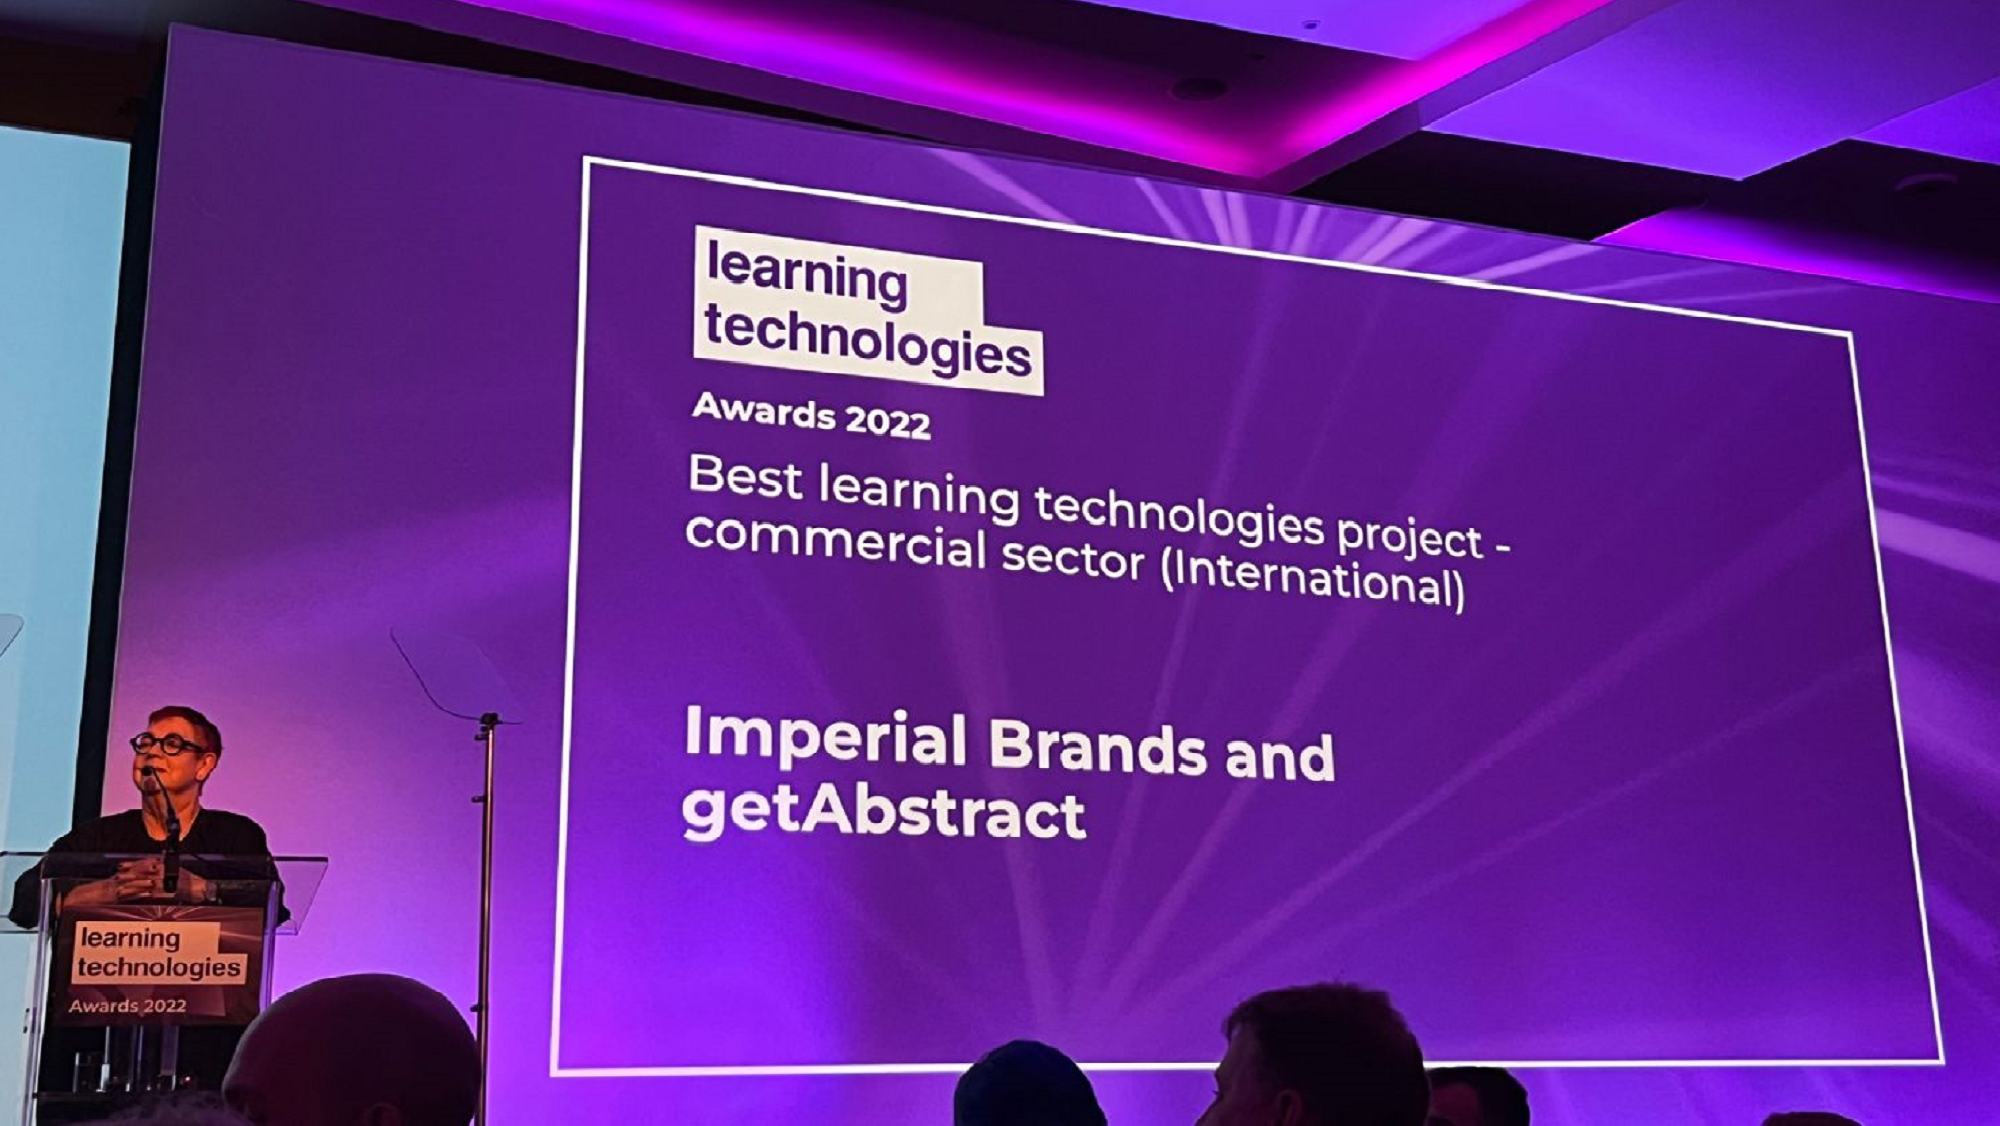 Learning Technologies Awards 2022: Shortlist Nomination for Imperial Brands & getAbstract